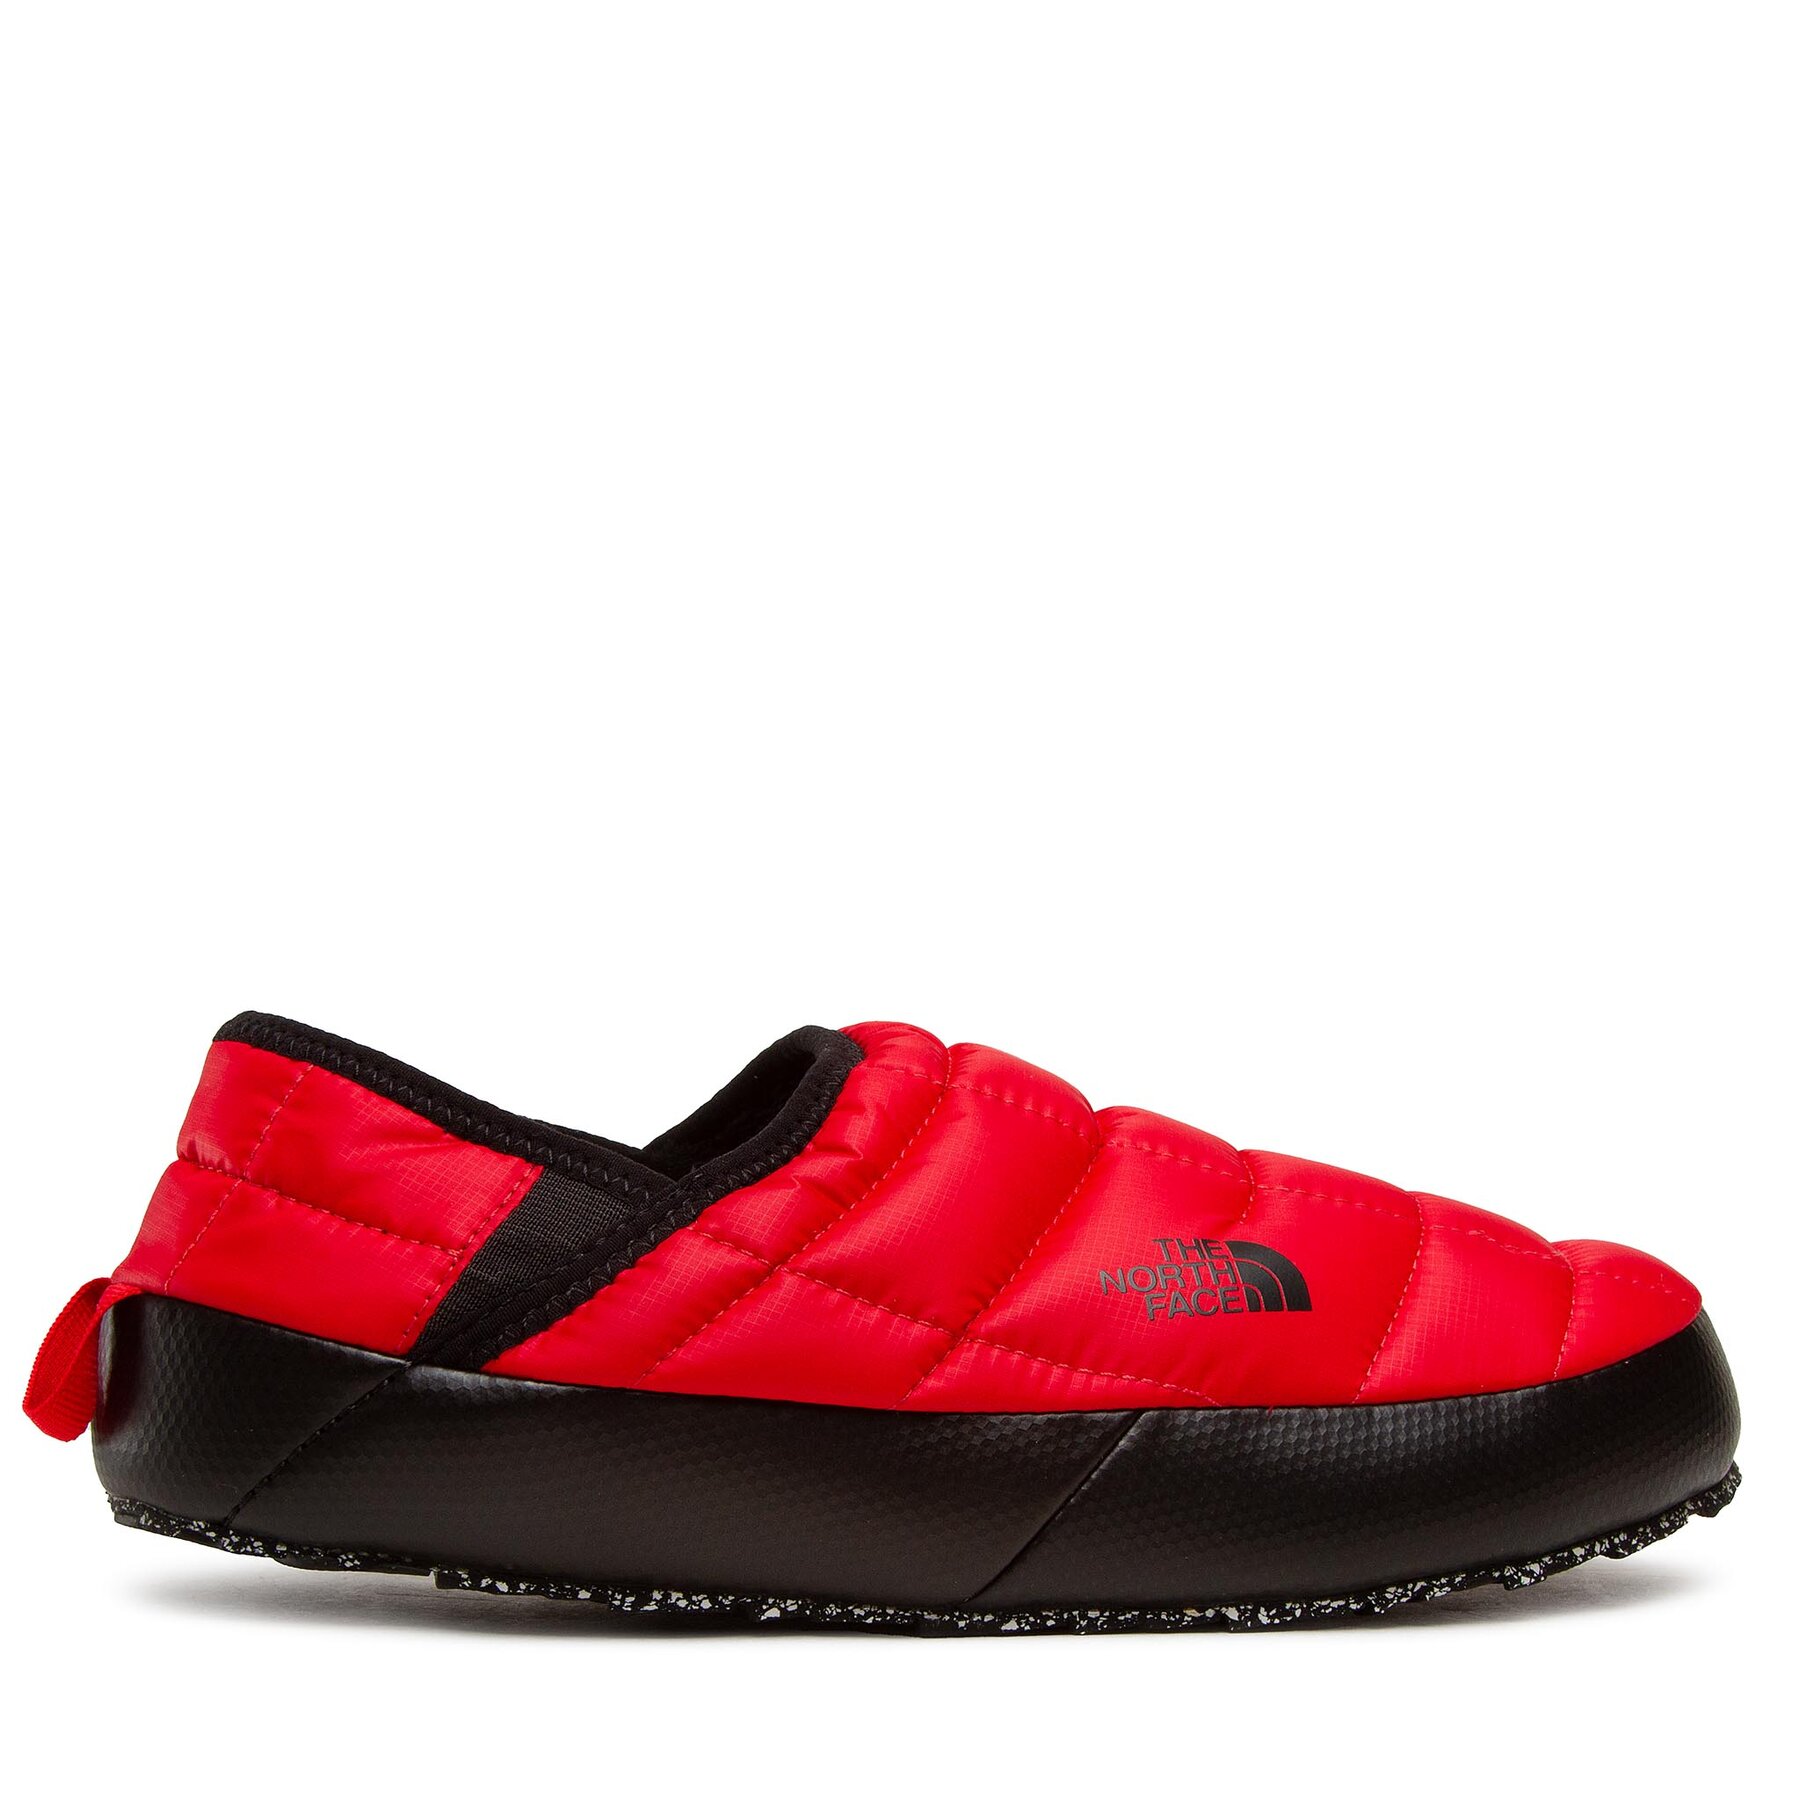 Hausschuhe The North Face Thermoball Traction Mule V NF0A3UZNKZ31-070 Tnf Red/Tnf Black von The North Face